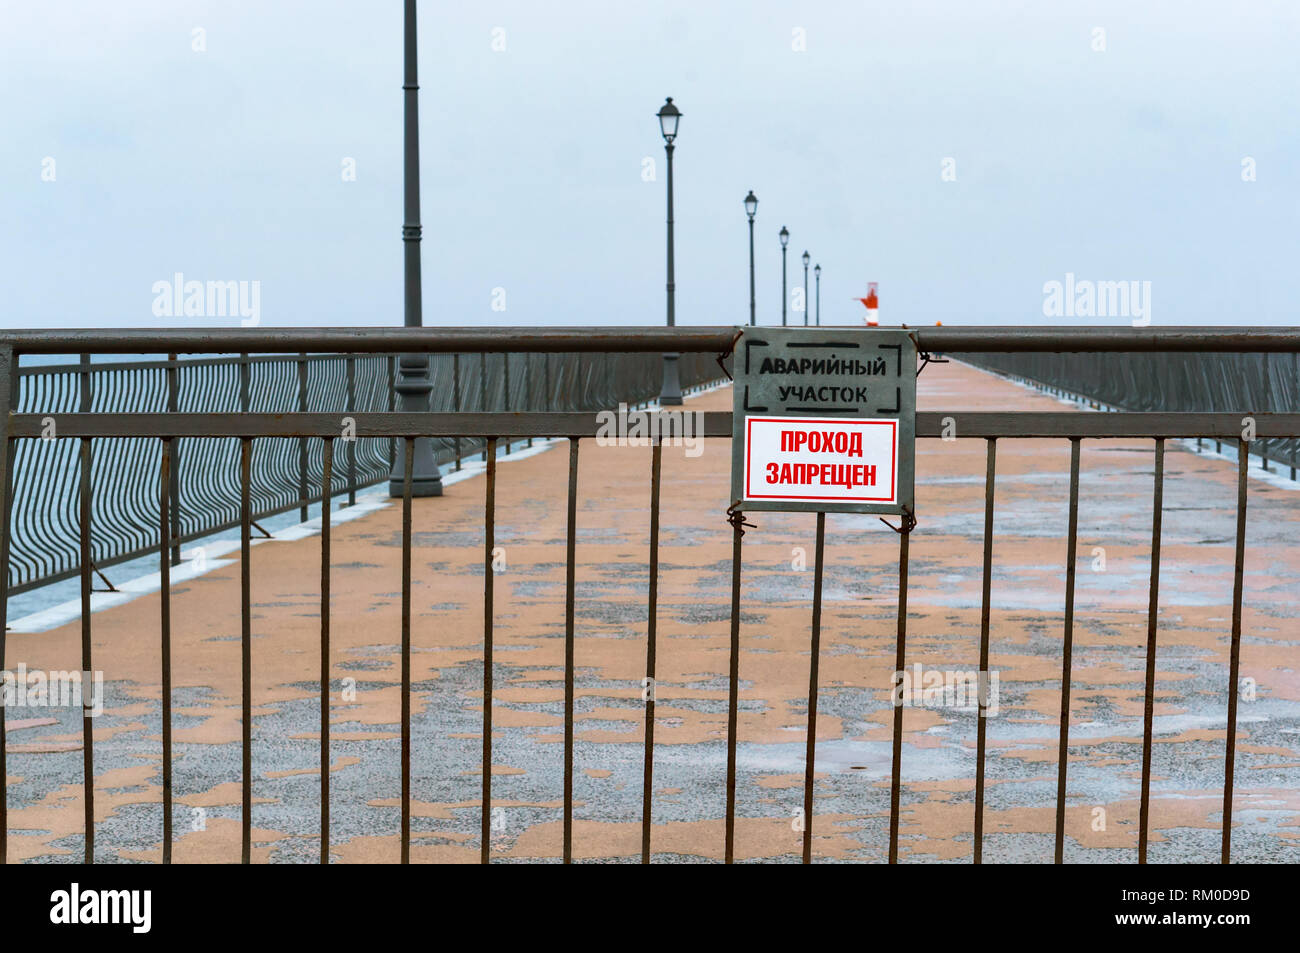 Kaliningrad region, city of Pionersky, Baltic sea, November 25, 2018, the fence and the sign "passage is prohibited", closed passage with a sign Stock Photo